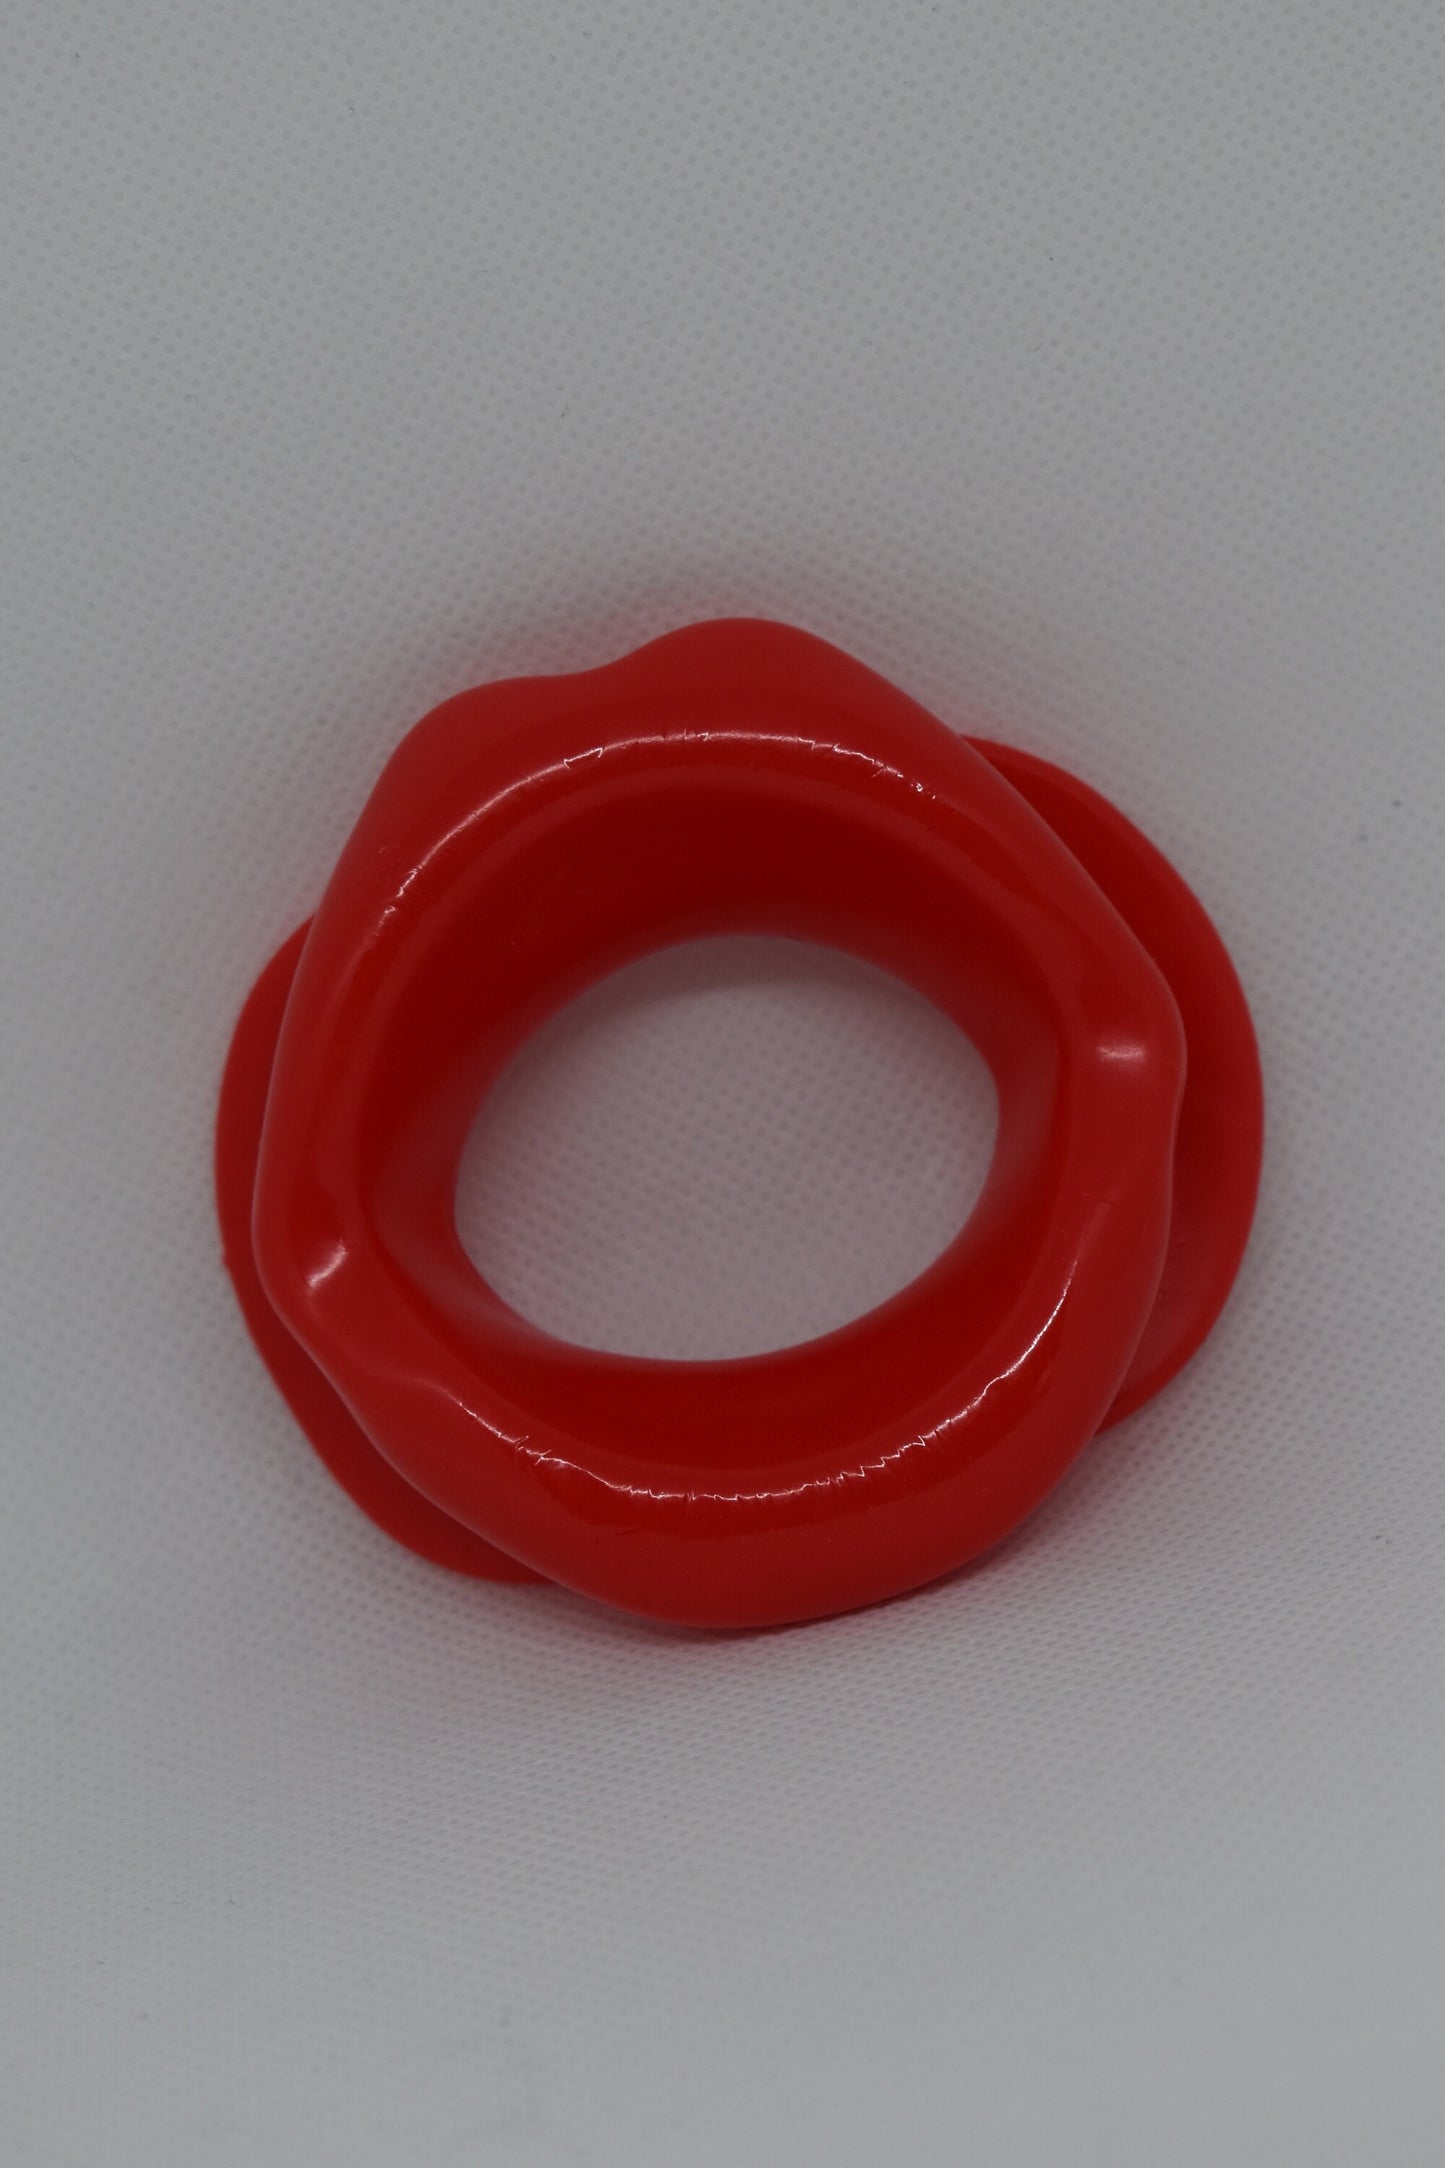 Silicone Mouth Red, Fetish Product, BDSM